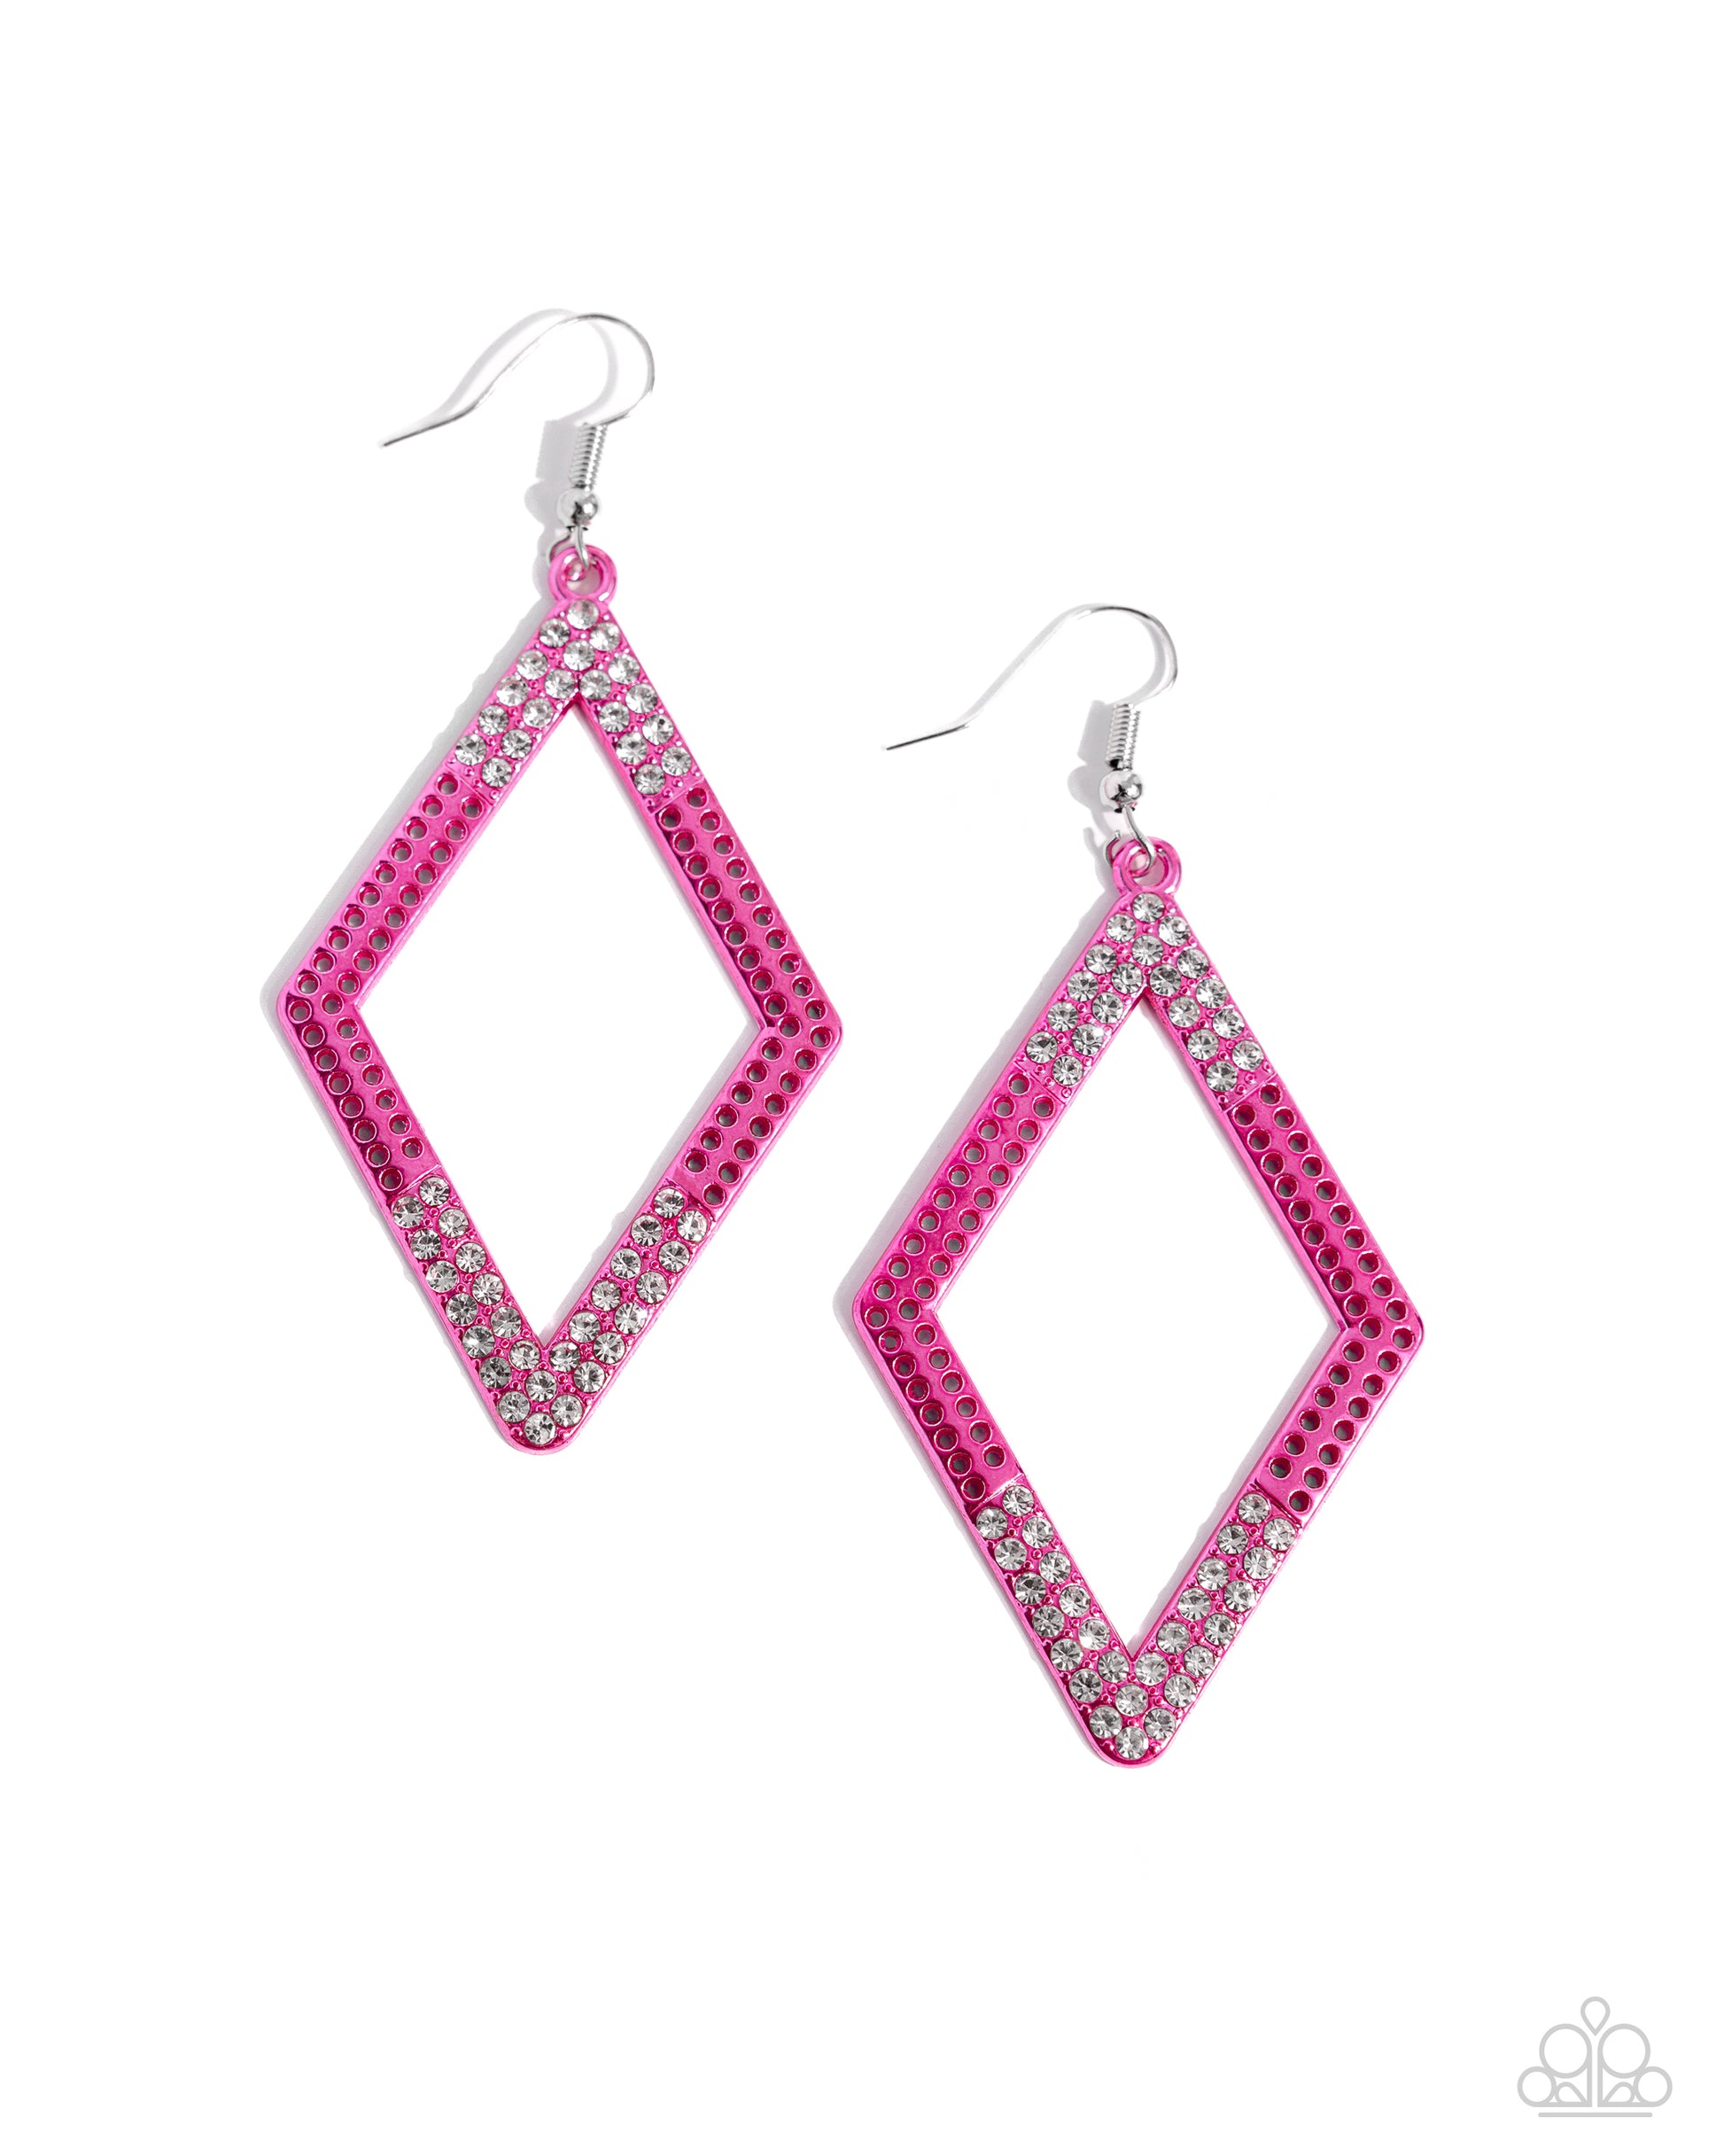 <p data-mce-fragment="1">Paparazzi Accessories - Eloquently Edgy - Pink Earrings dipped in an electric pink hue, a dotted diamond frame is sprinkled with dainty white rhinestones on its ends for a dazzling, dynamic design. Earring attaches to a standard fishhook fitting.</p> <p data-mce-fragment="1"><i data-mce-fragment="1">Sold as one pair of earrings.</i></p>